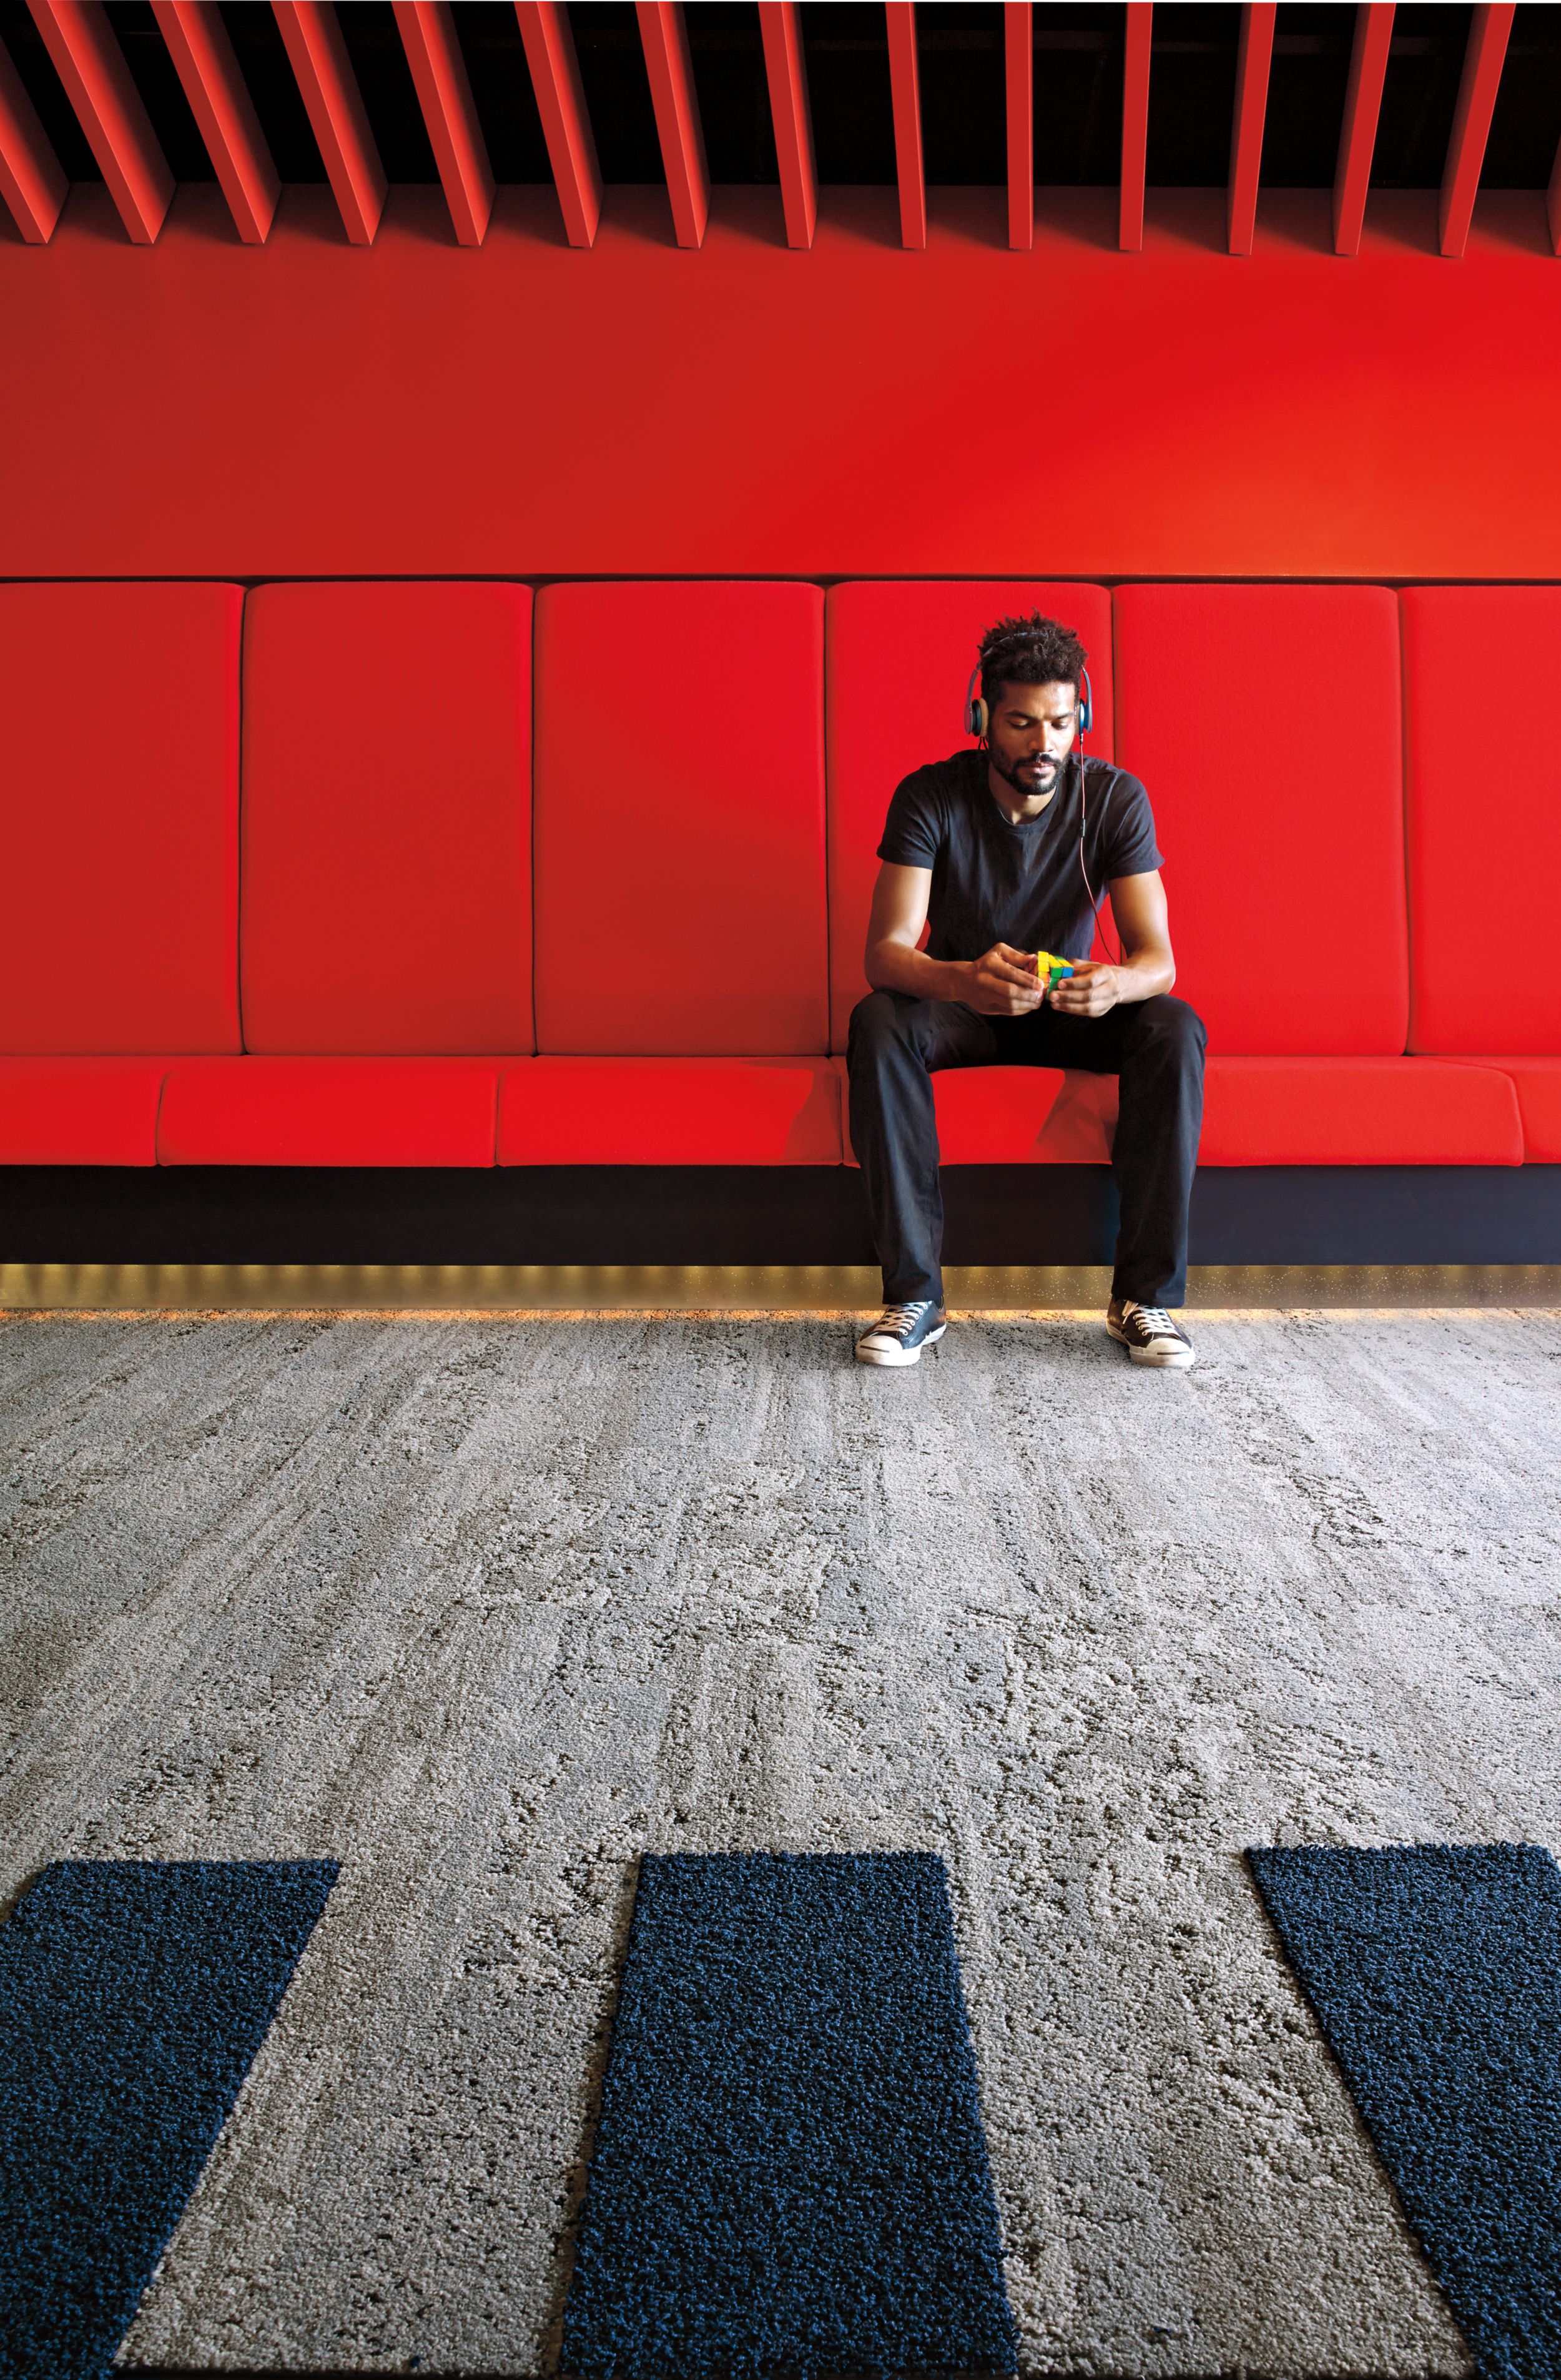 Interface HN810 plank carpet tile in waiting area with red bench and wall and man listening to music numéro d’image 7